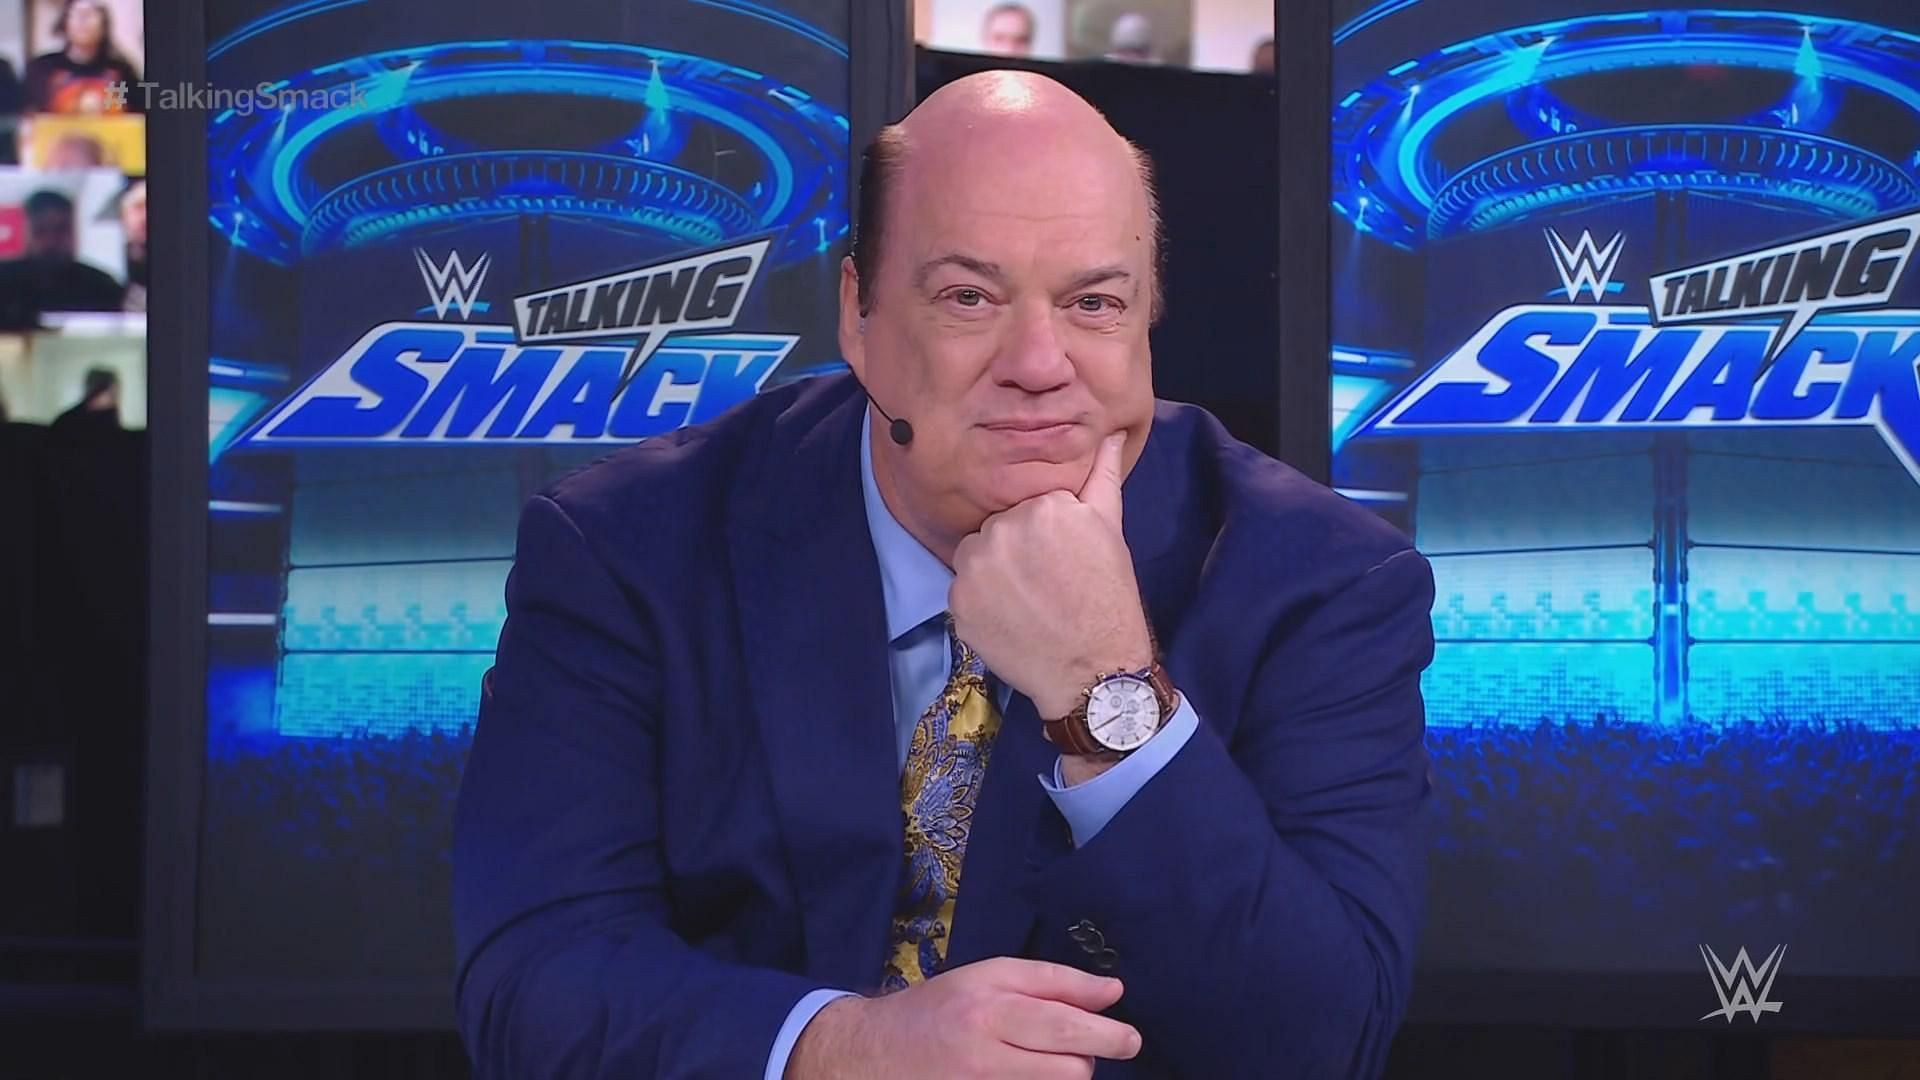 Paul Heyman is currently aligned with The Bloodline in WWE.